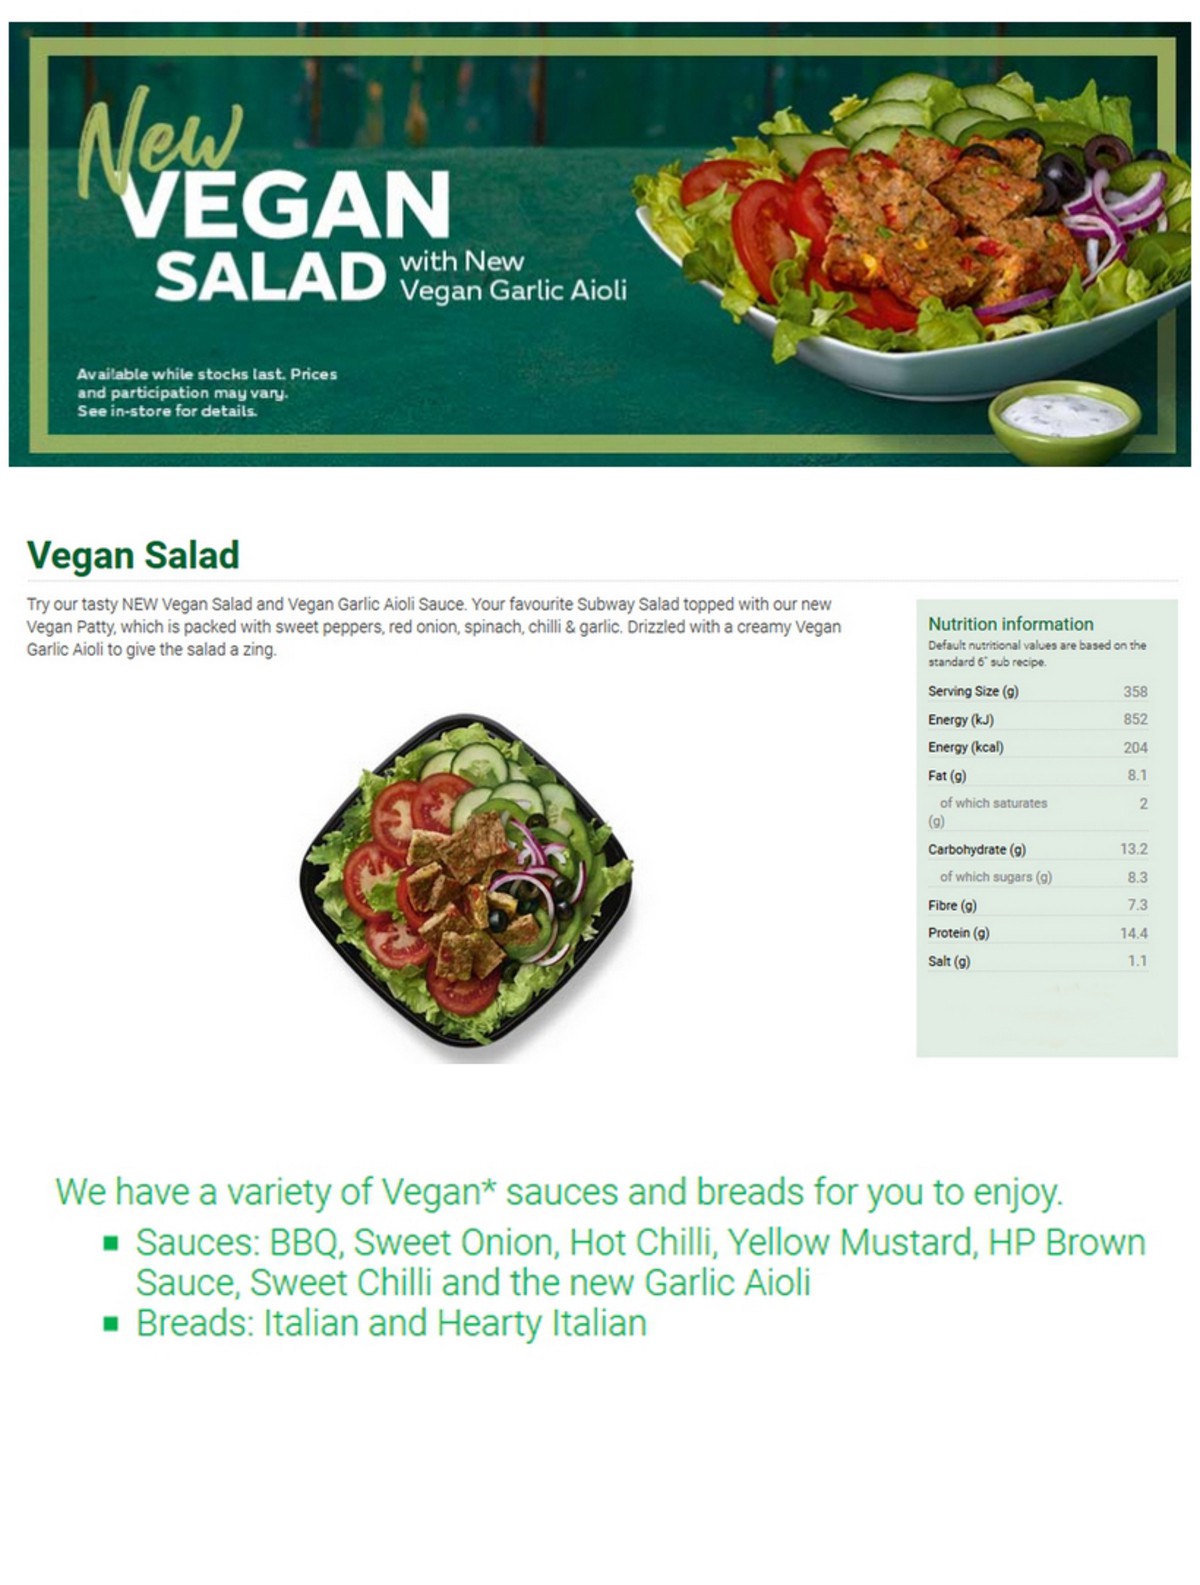 SUBWAY Vegan Offers from 1 April